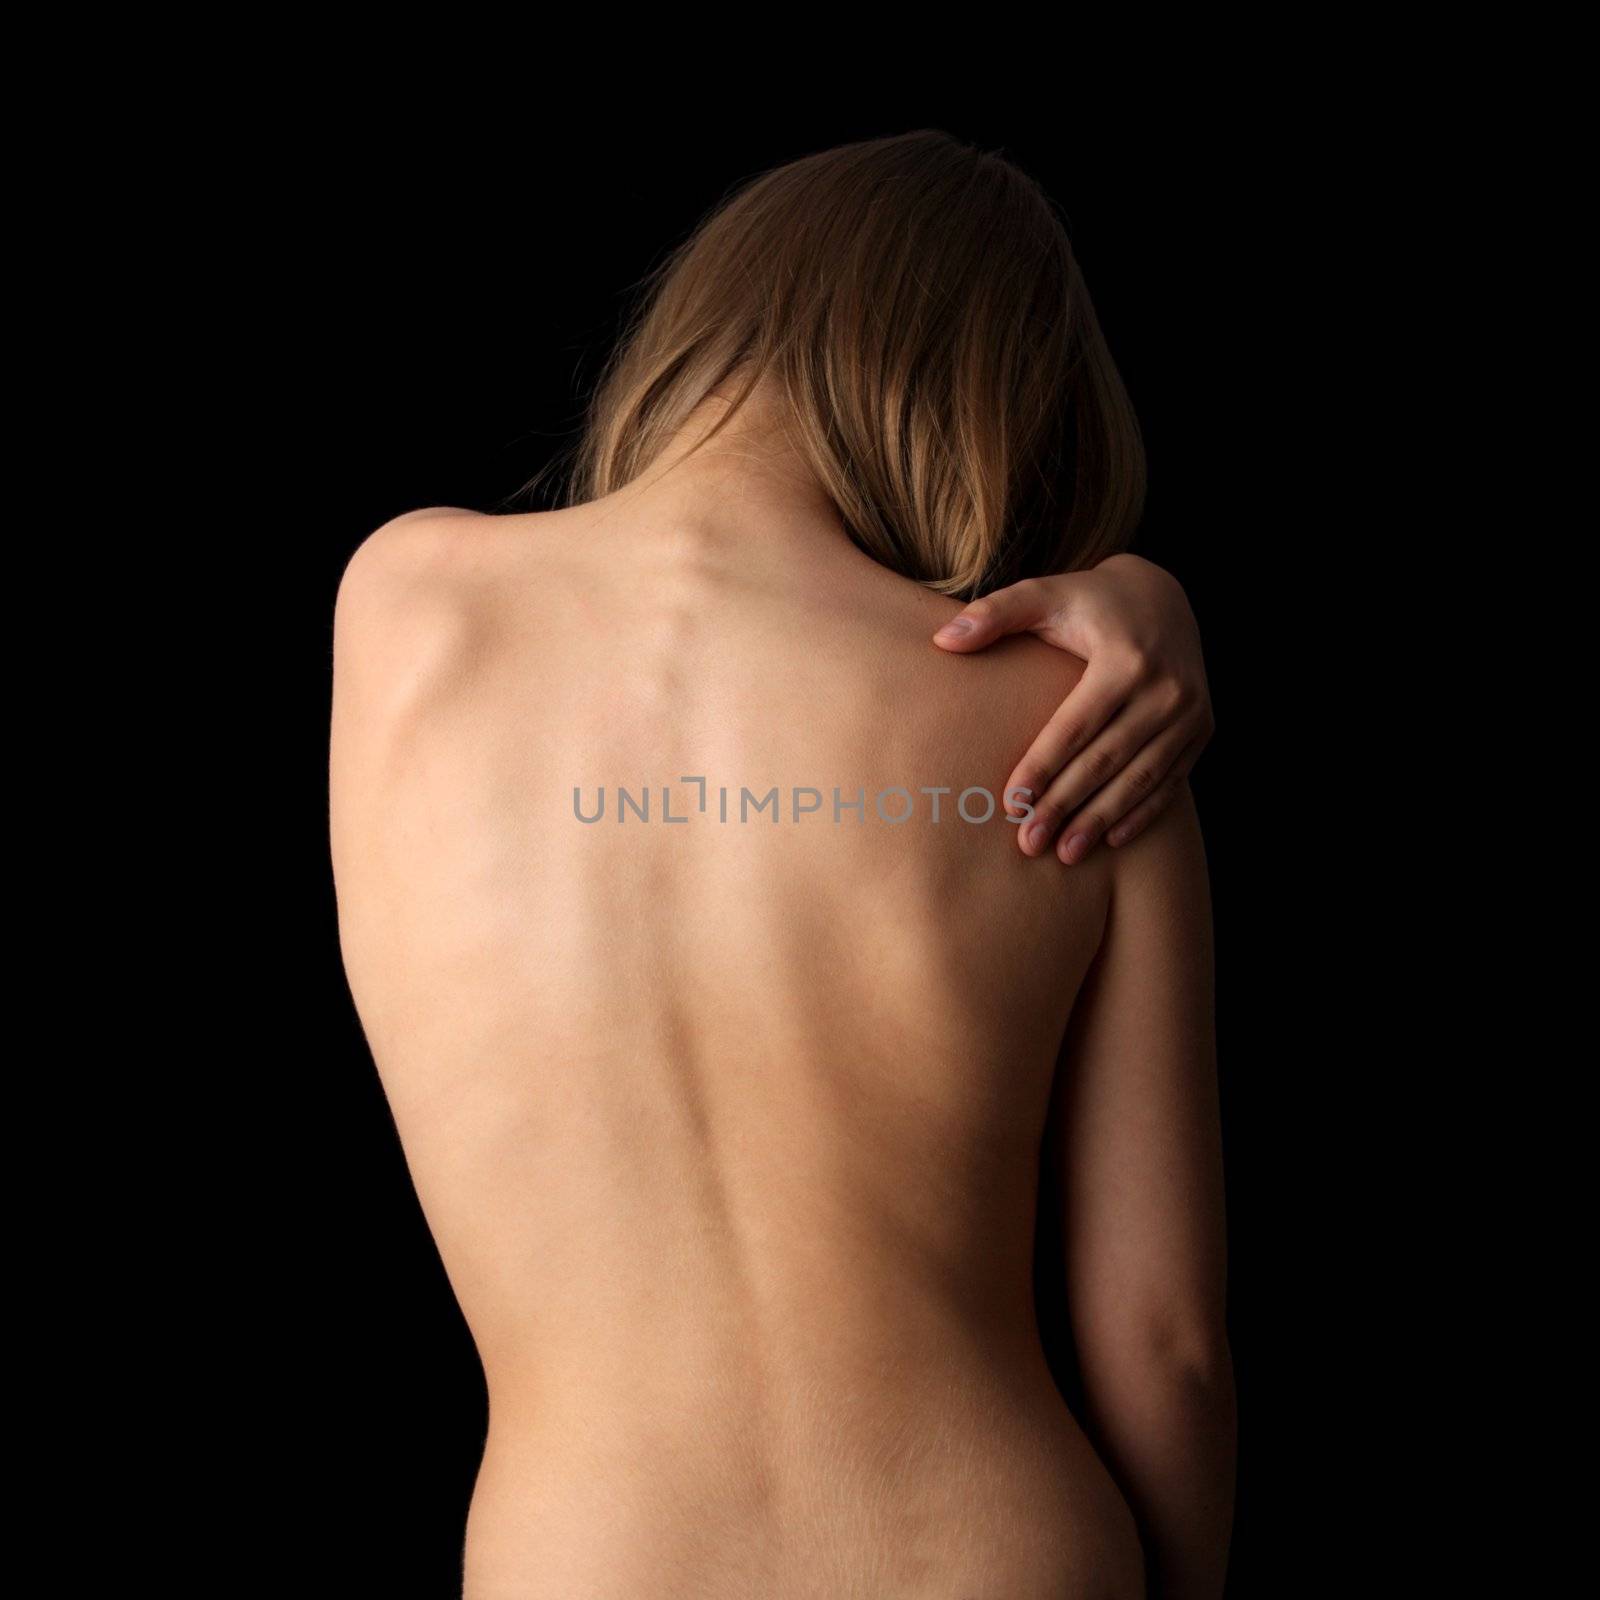 Woman from behind, naked body, pain concept